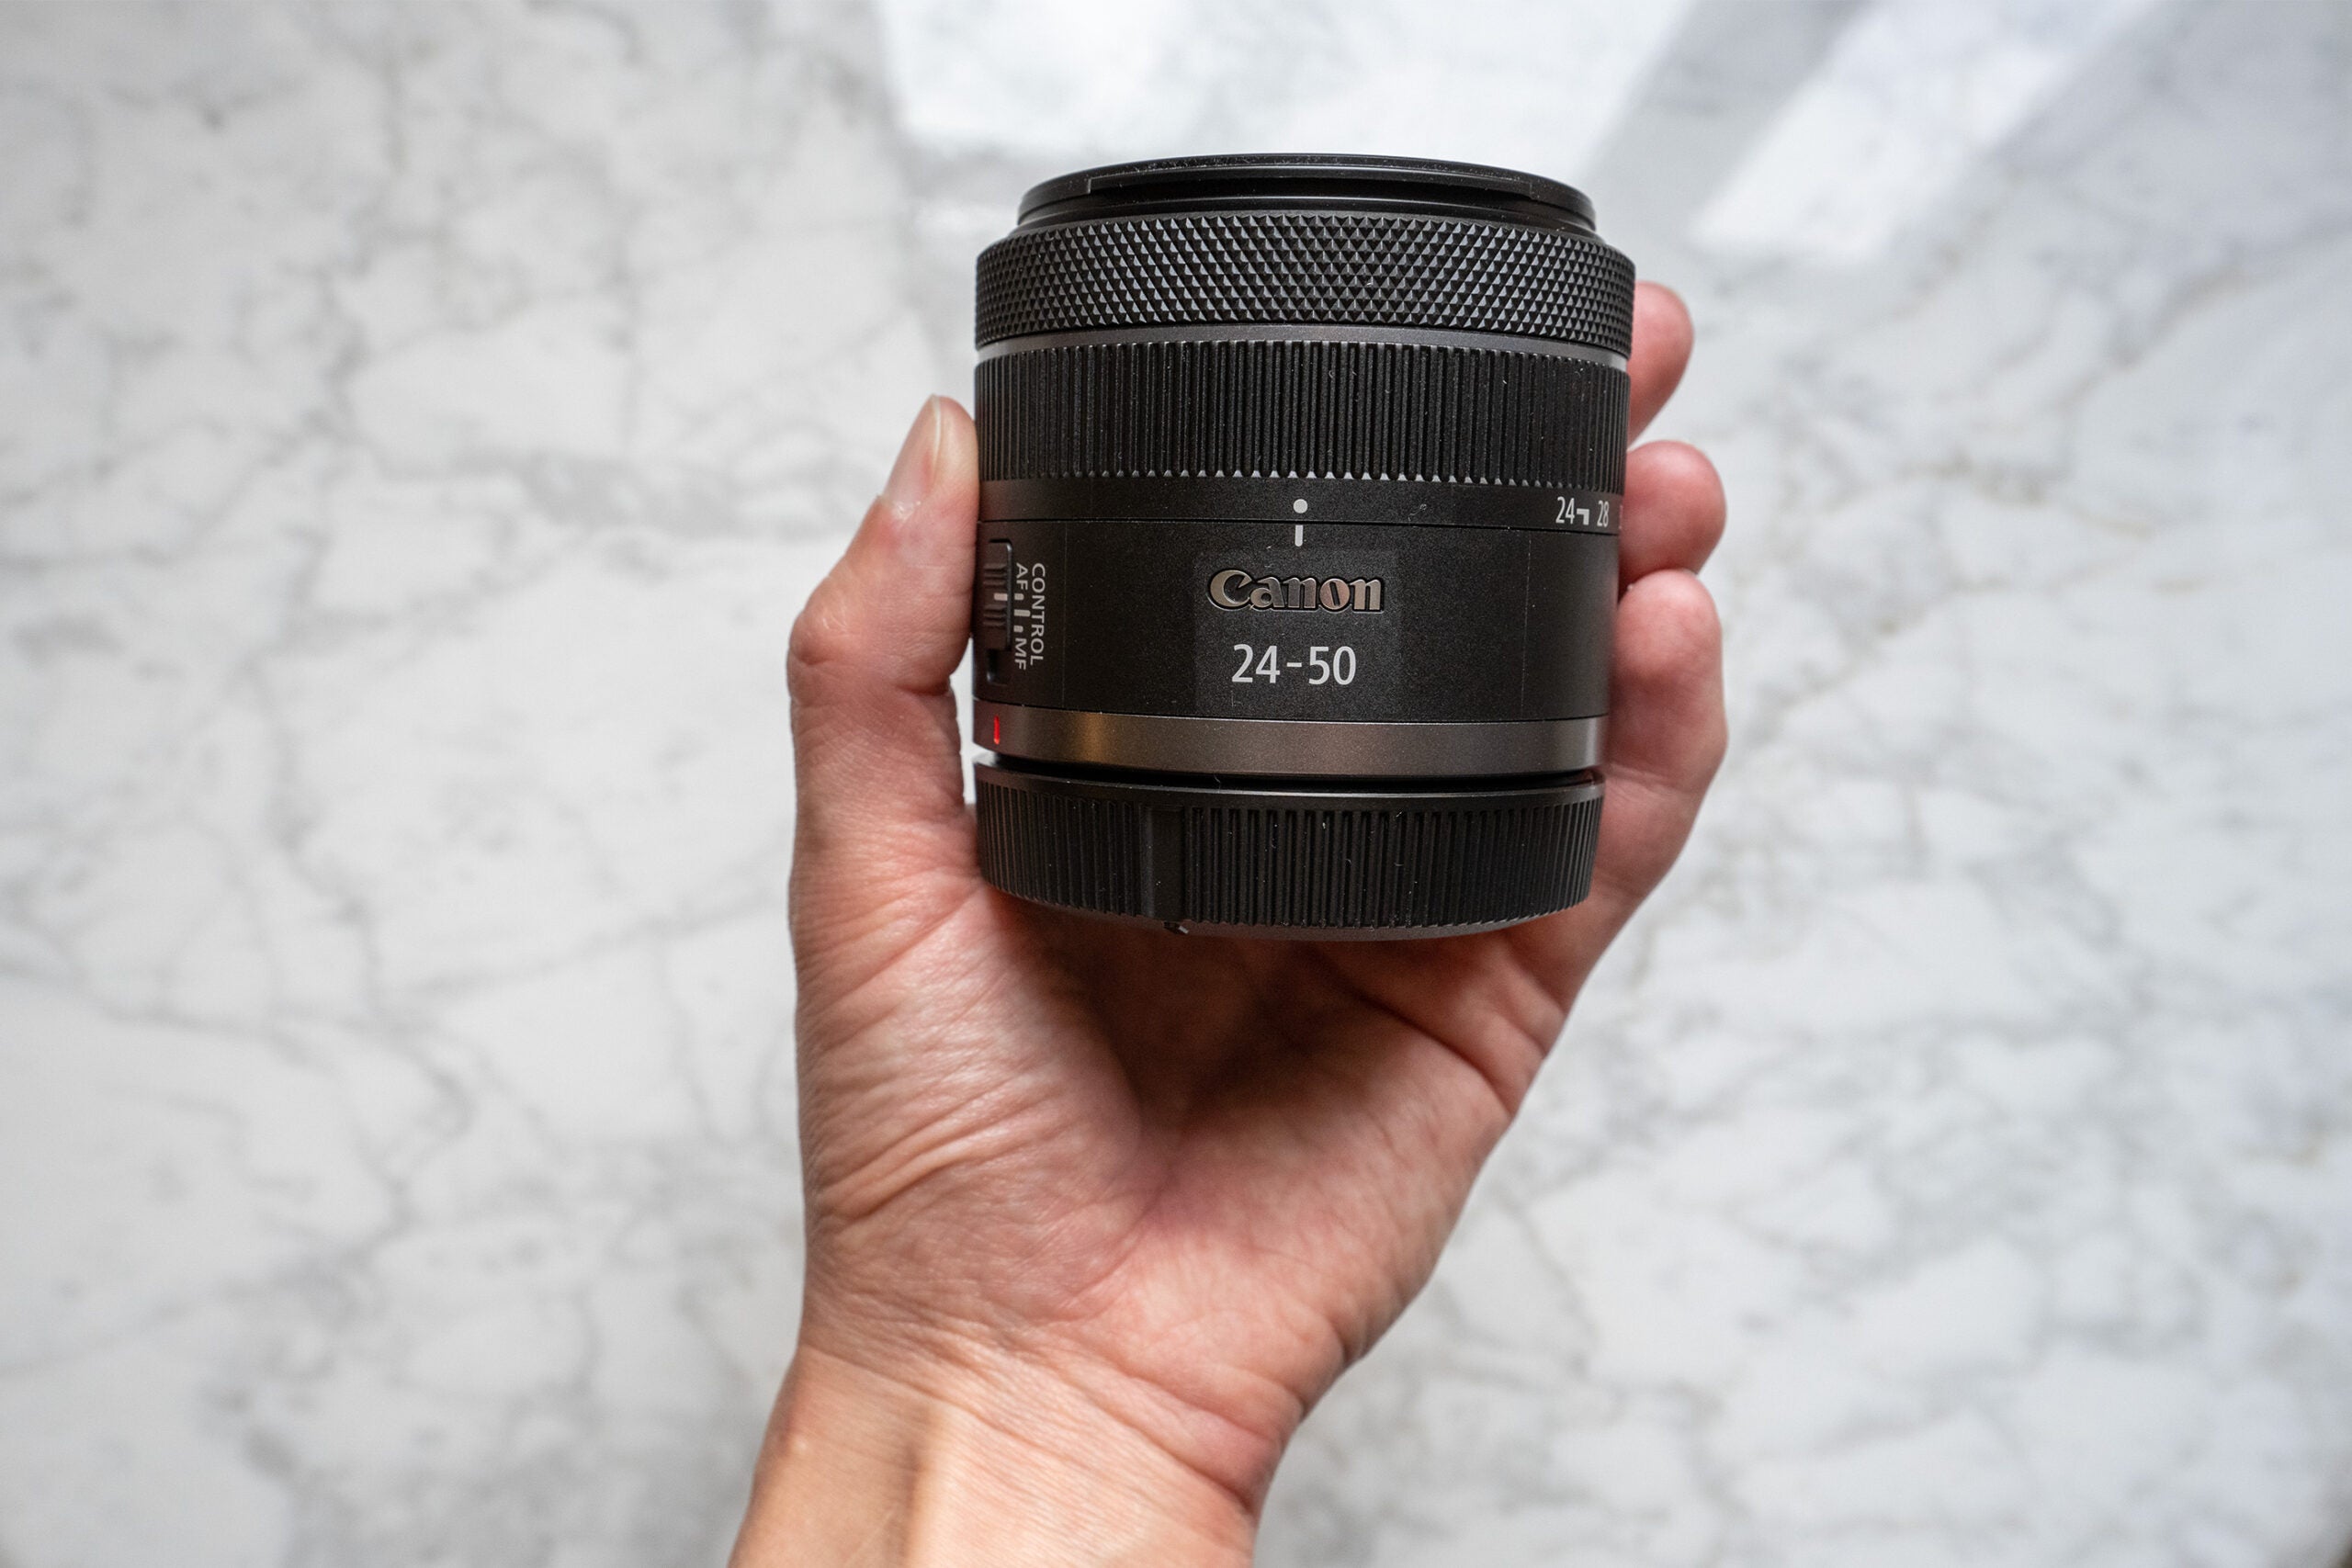 Hands-on with the Canon RF24-50mm F4.5-6.3 IS STM lens